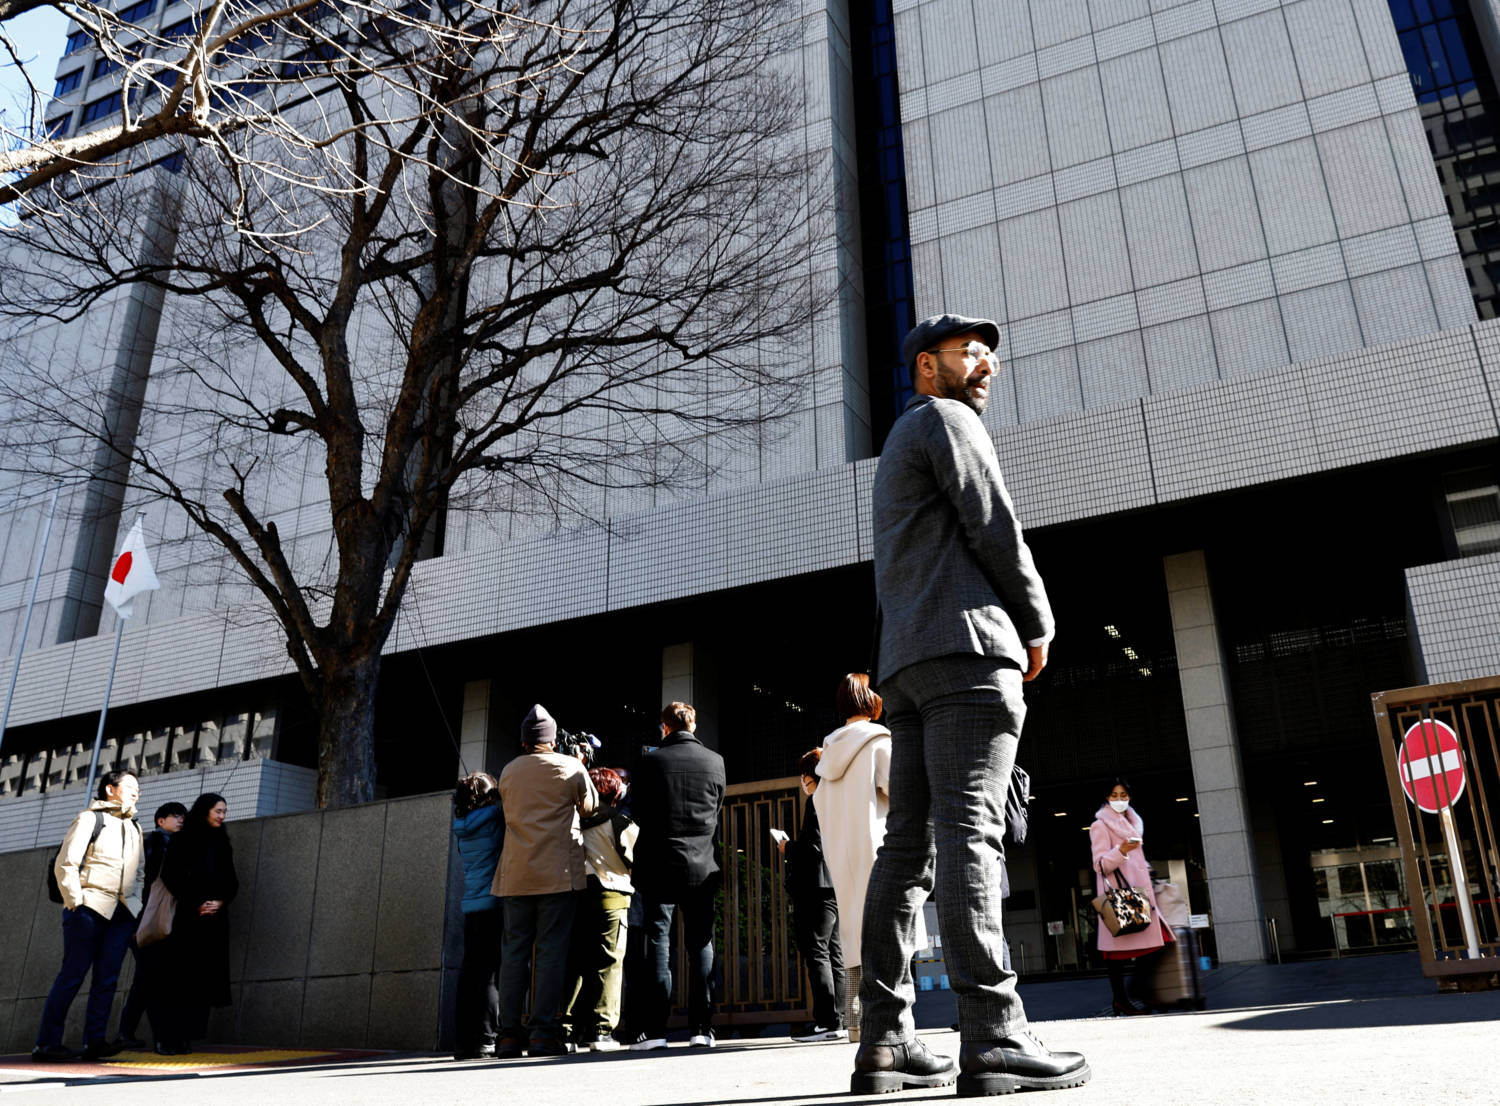 Foreign Born Residents Of Japan Filed A Lawsuit Against The National And Local Governments Over Alleged Illegal Questioning By Police Based On Racial Profilingin Tokyo